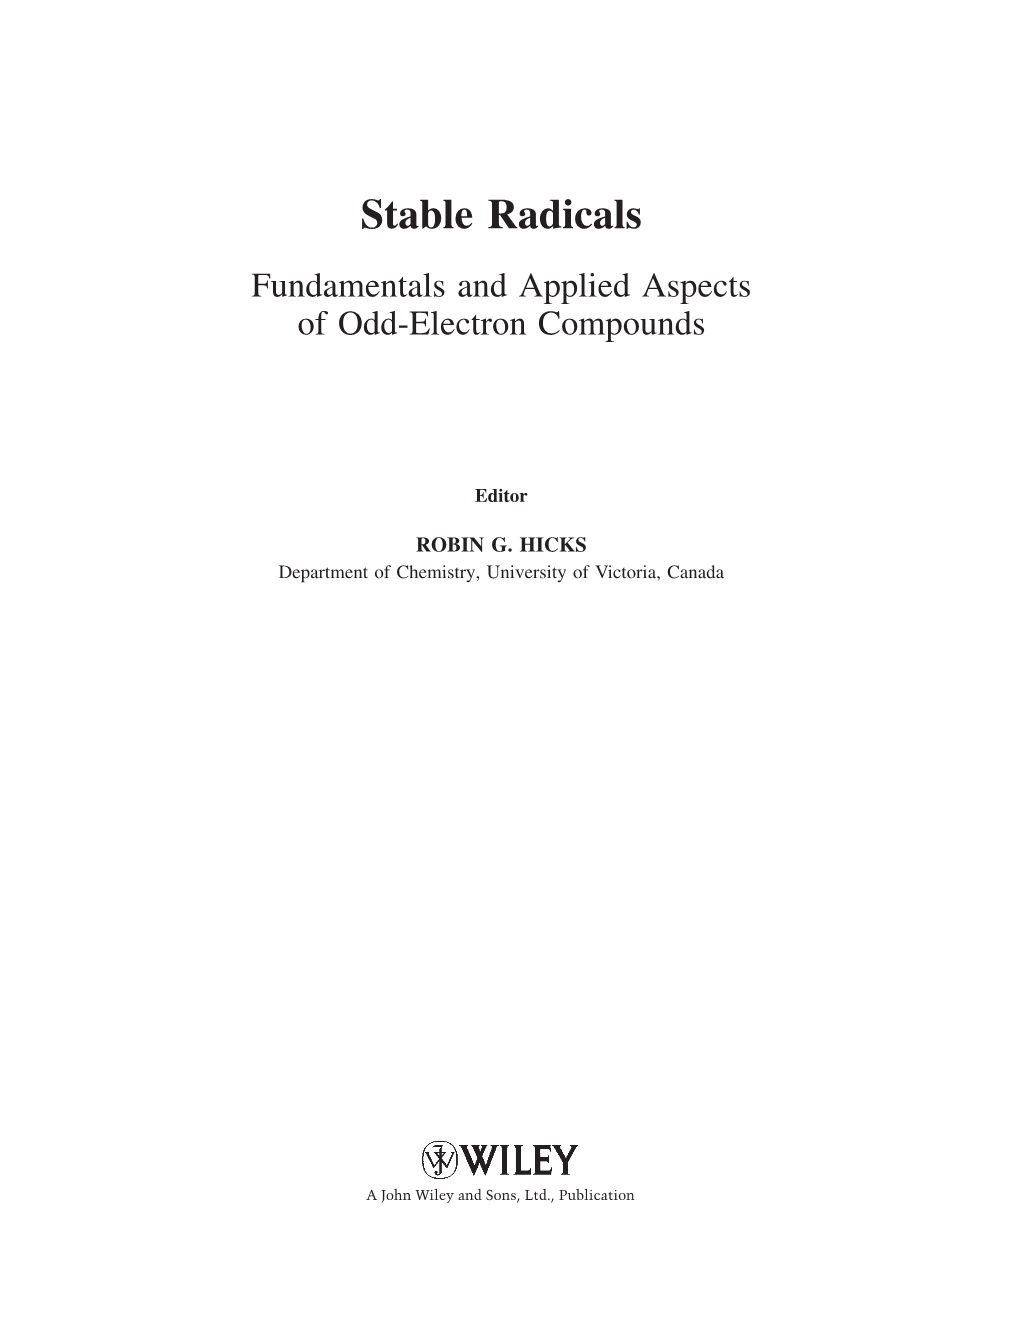 Stable Radicals Fundamentals and Applied Aspects of Odd-Electron Compounds